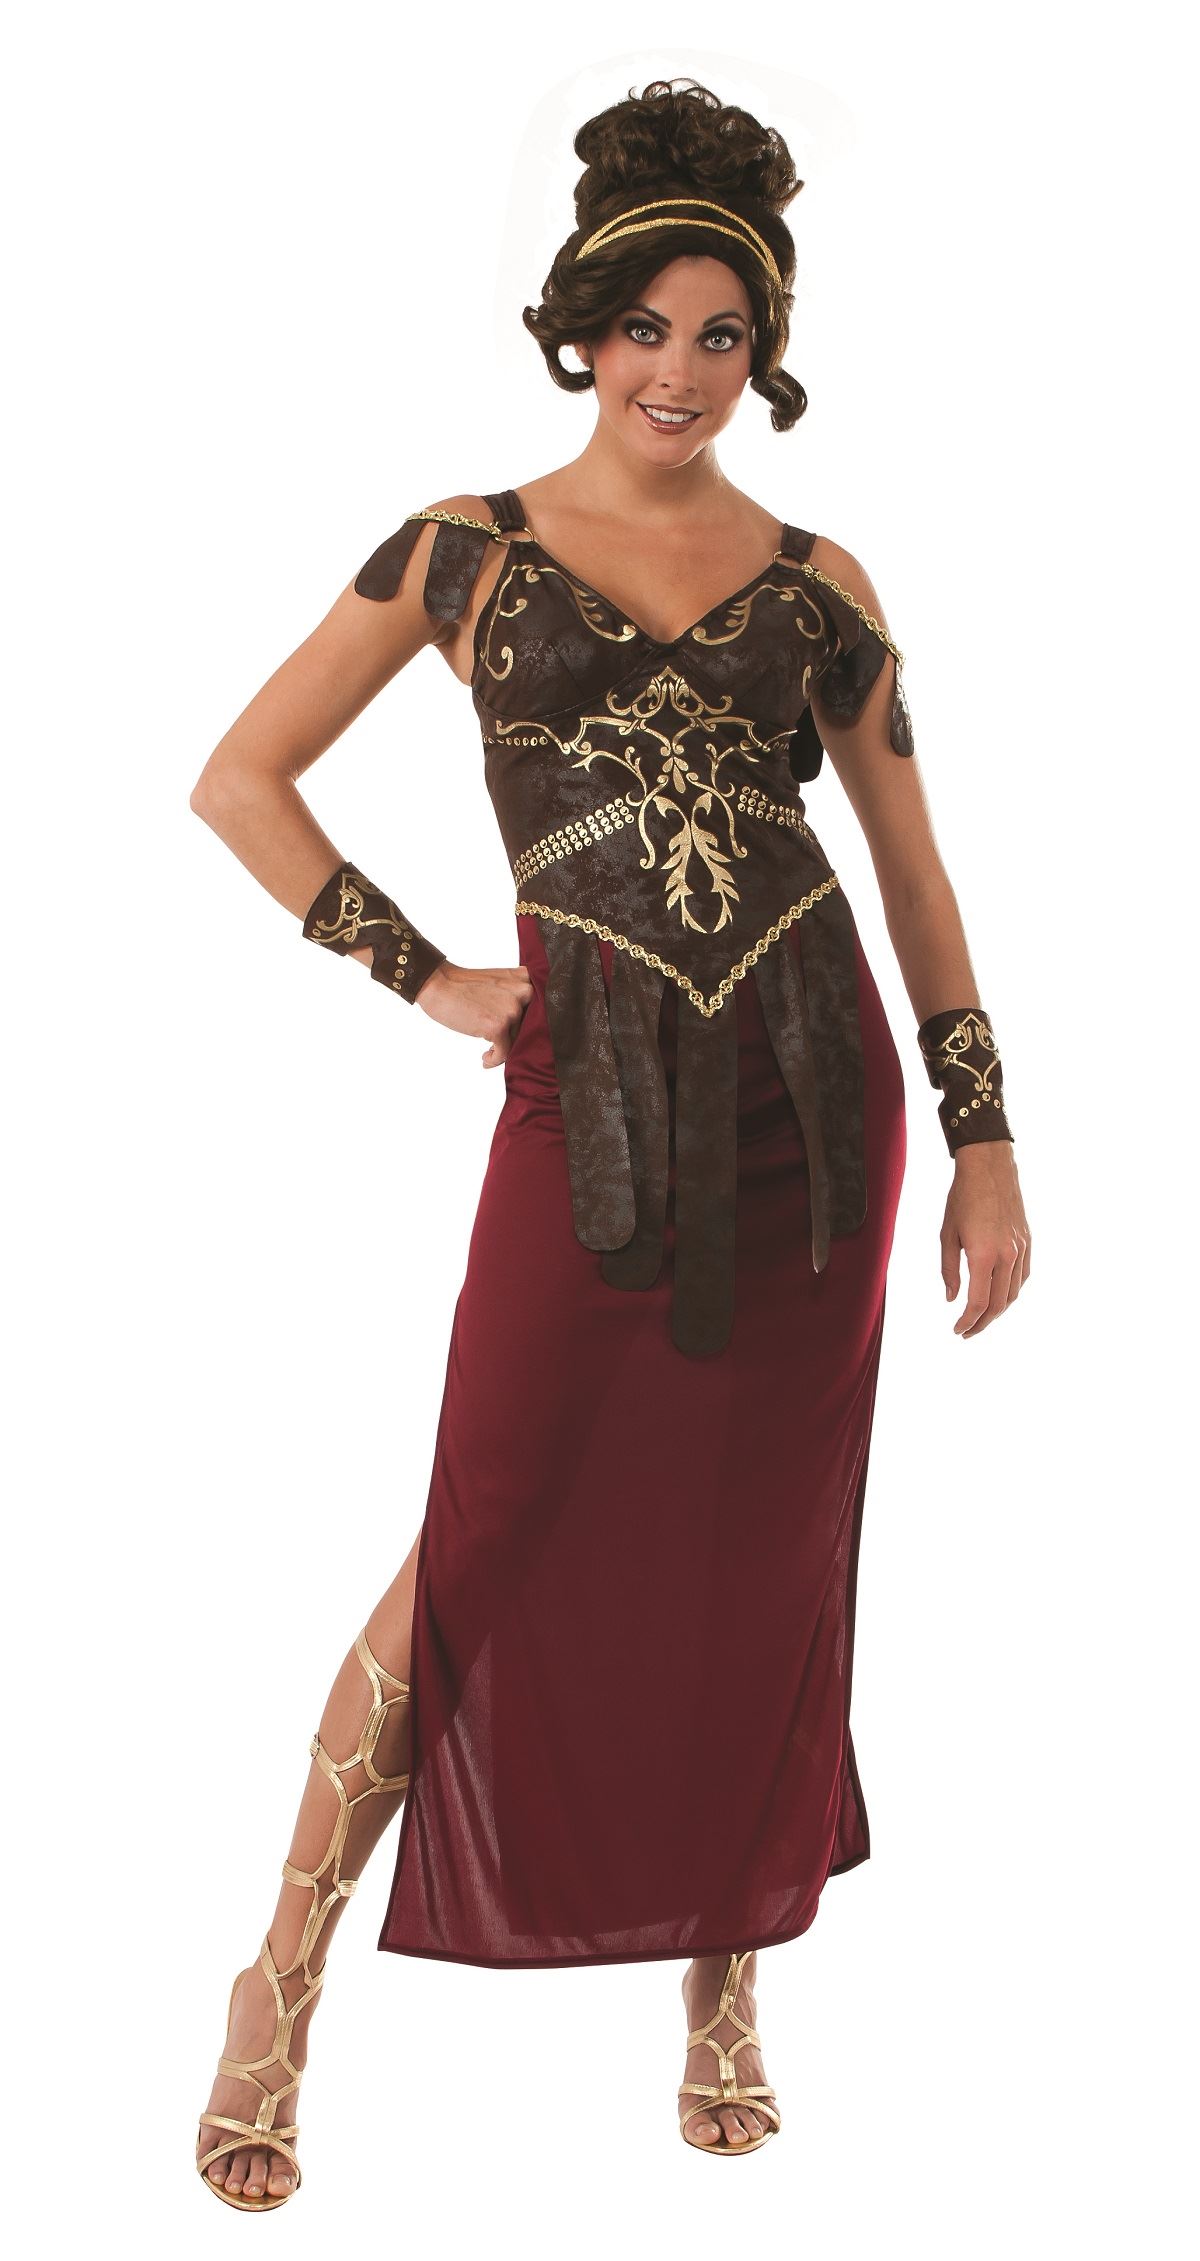 Adult Medieval Warrior Women Costume | $36.65 | The Costume Land